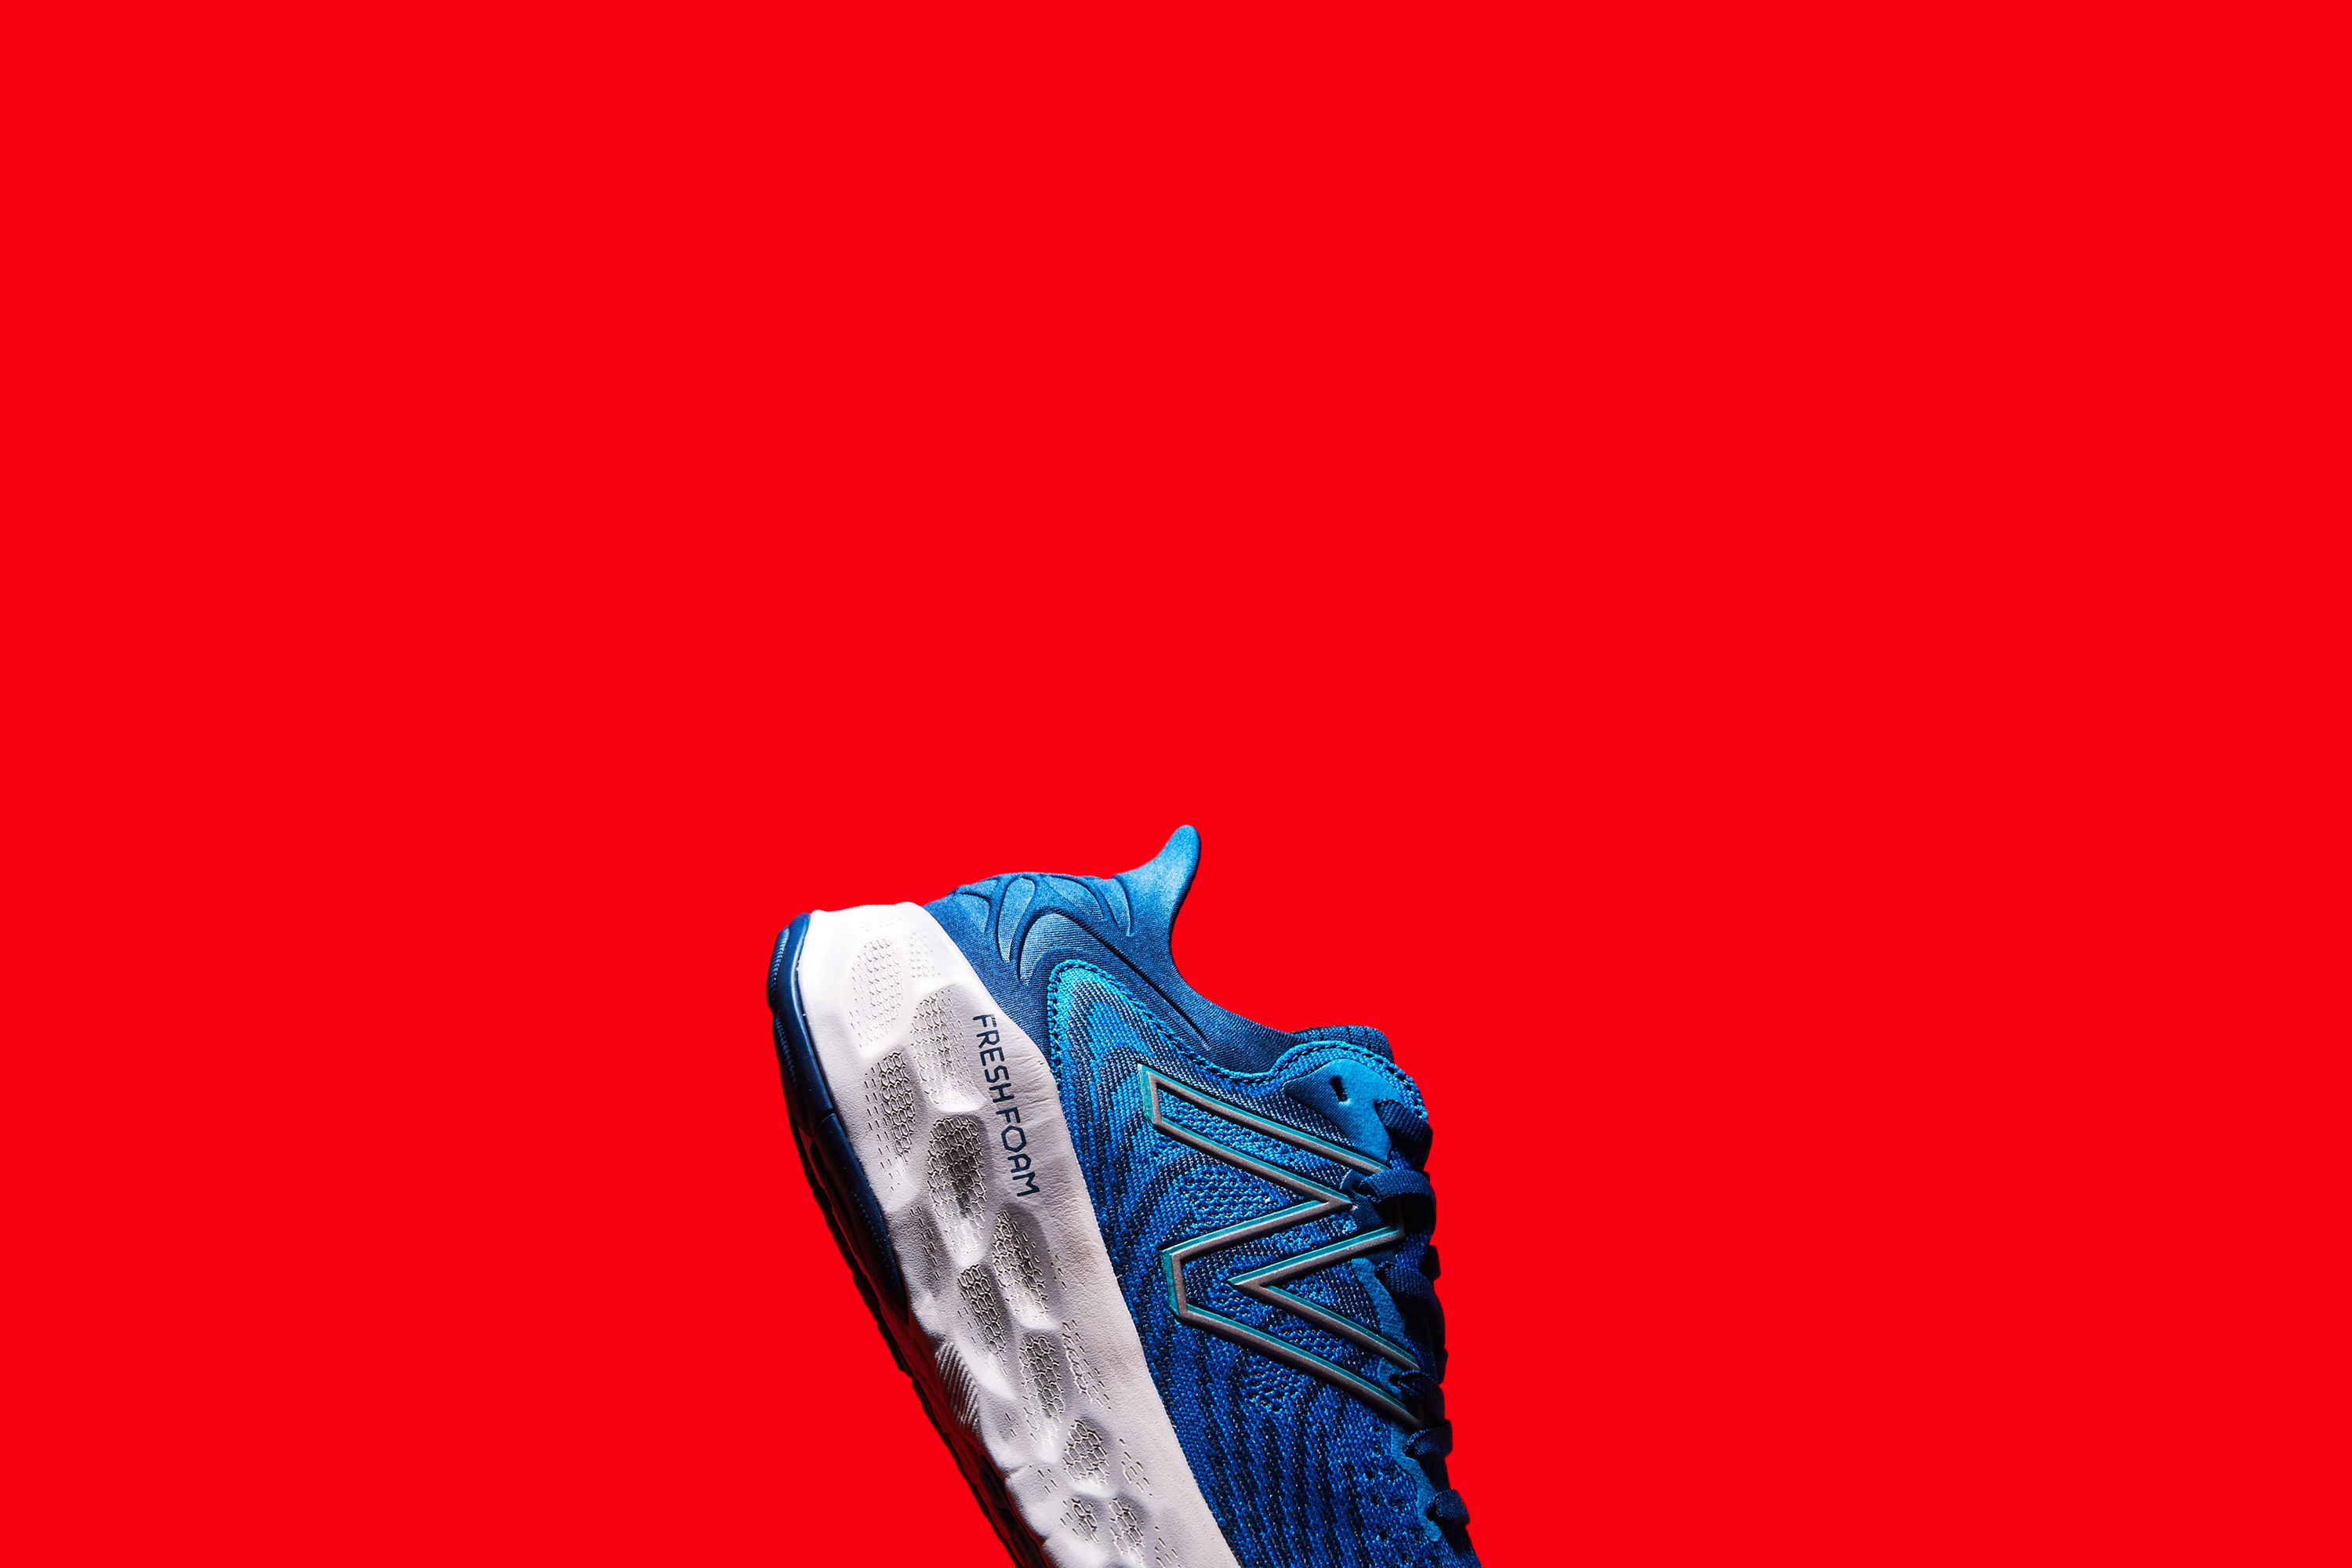 red new balance running shoes